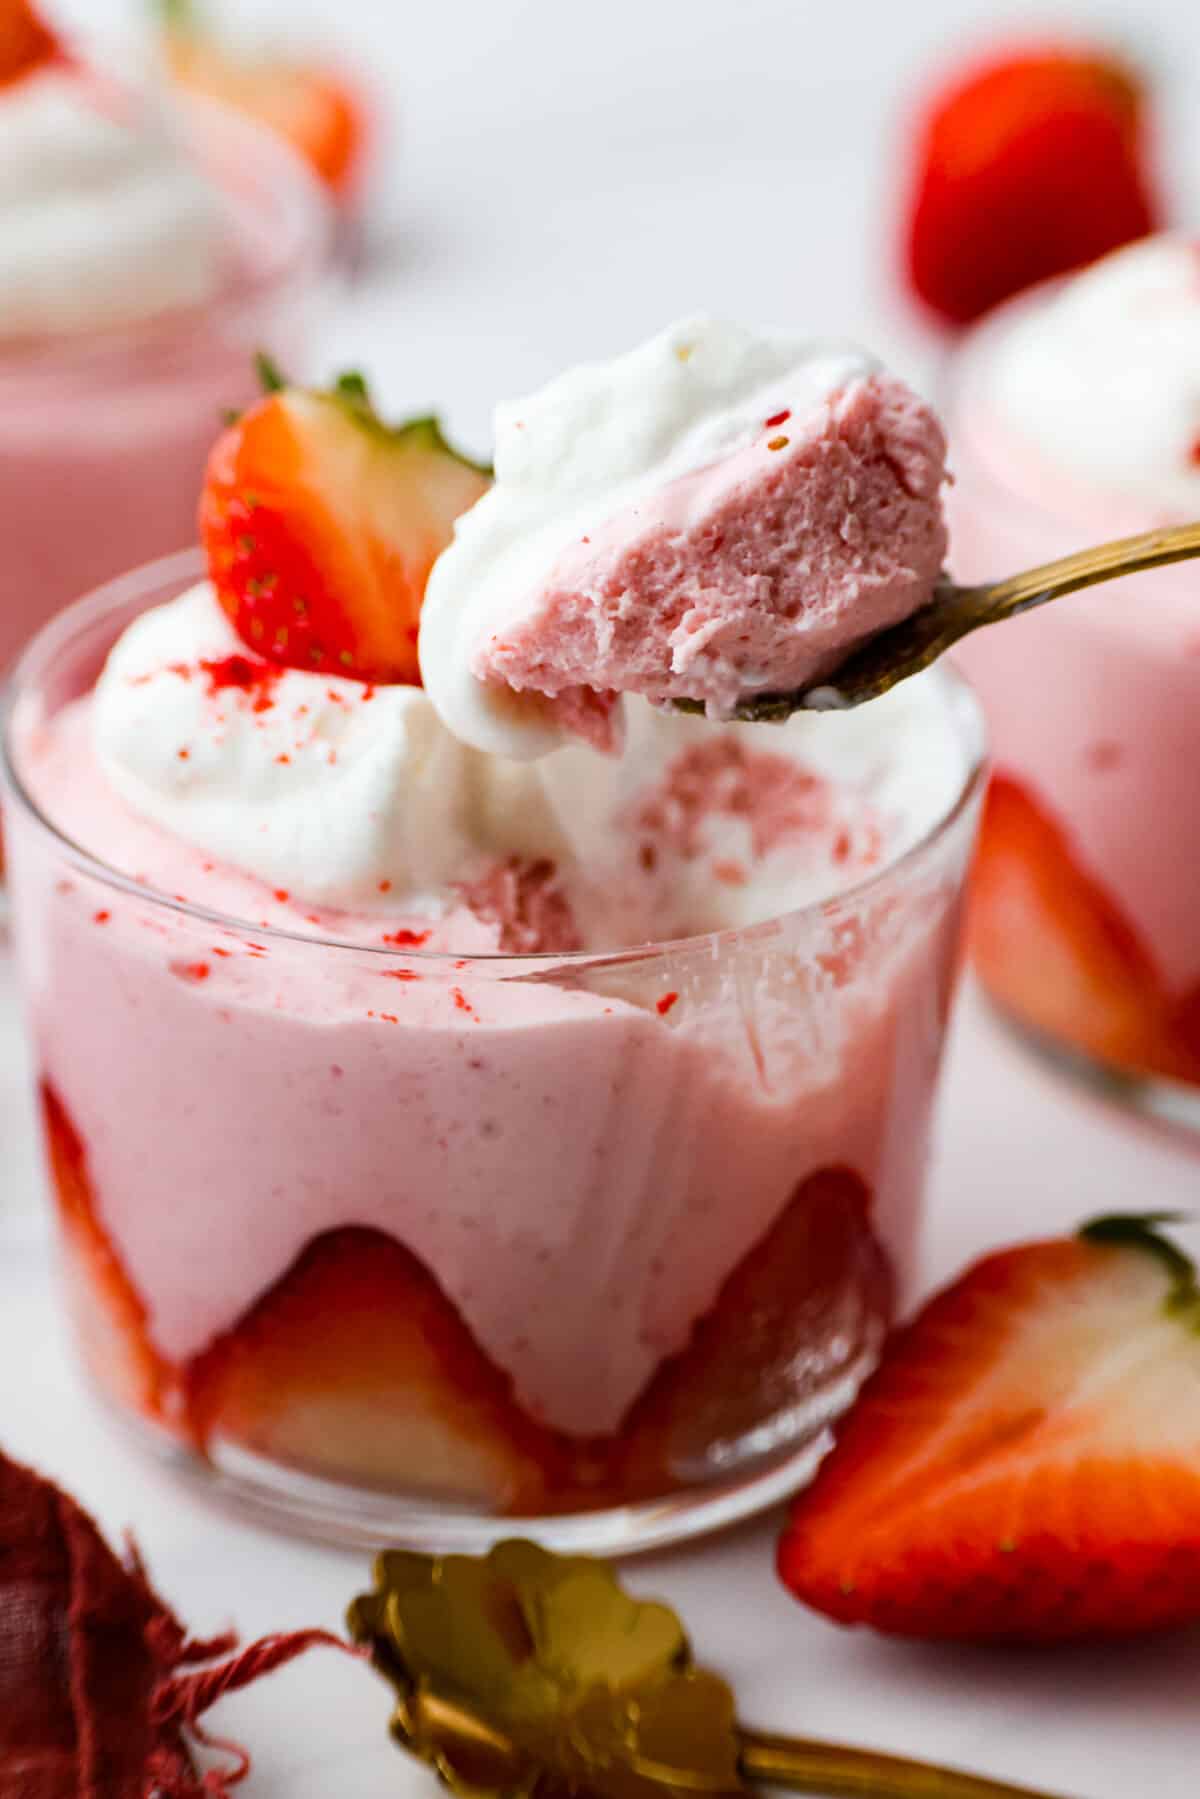 Taking a bite of strawberry mousse.